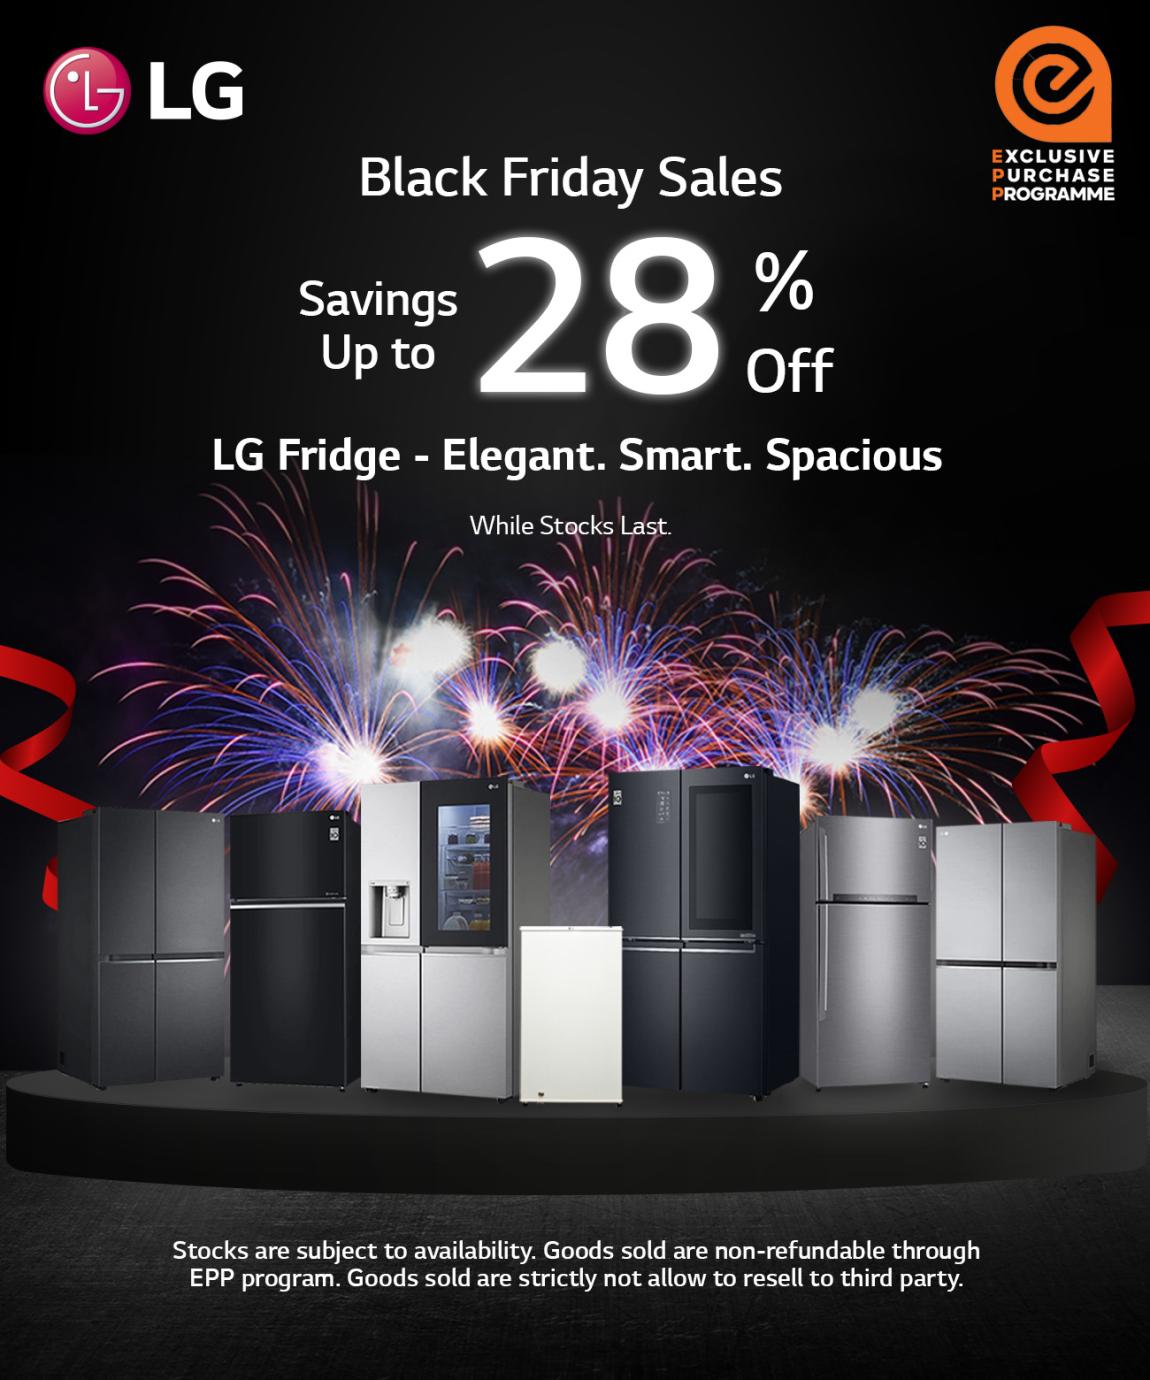 LG Black Friday Sales Savings Up to 28 off Ministry of Education